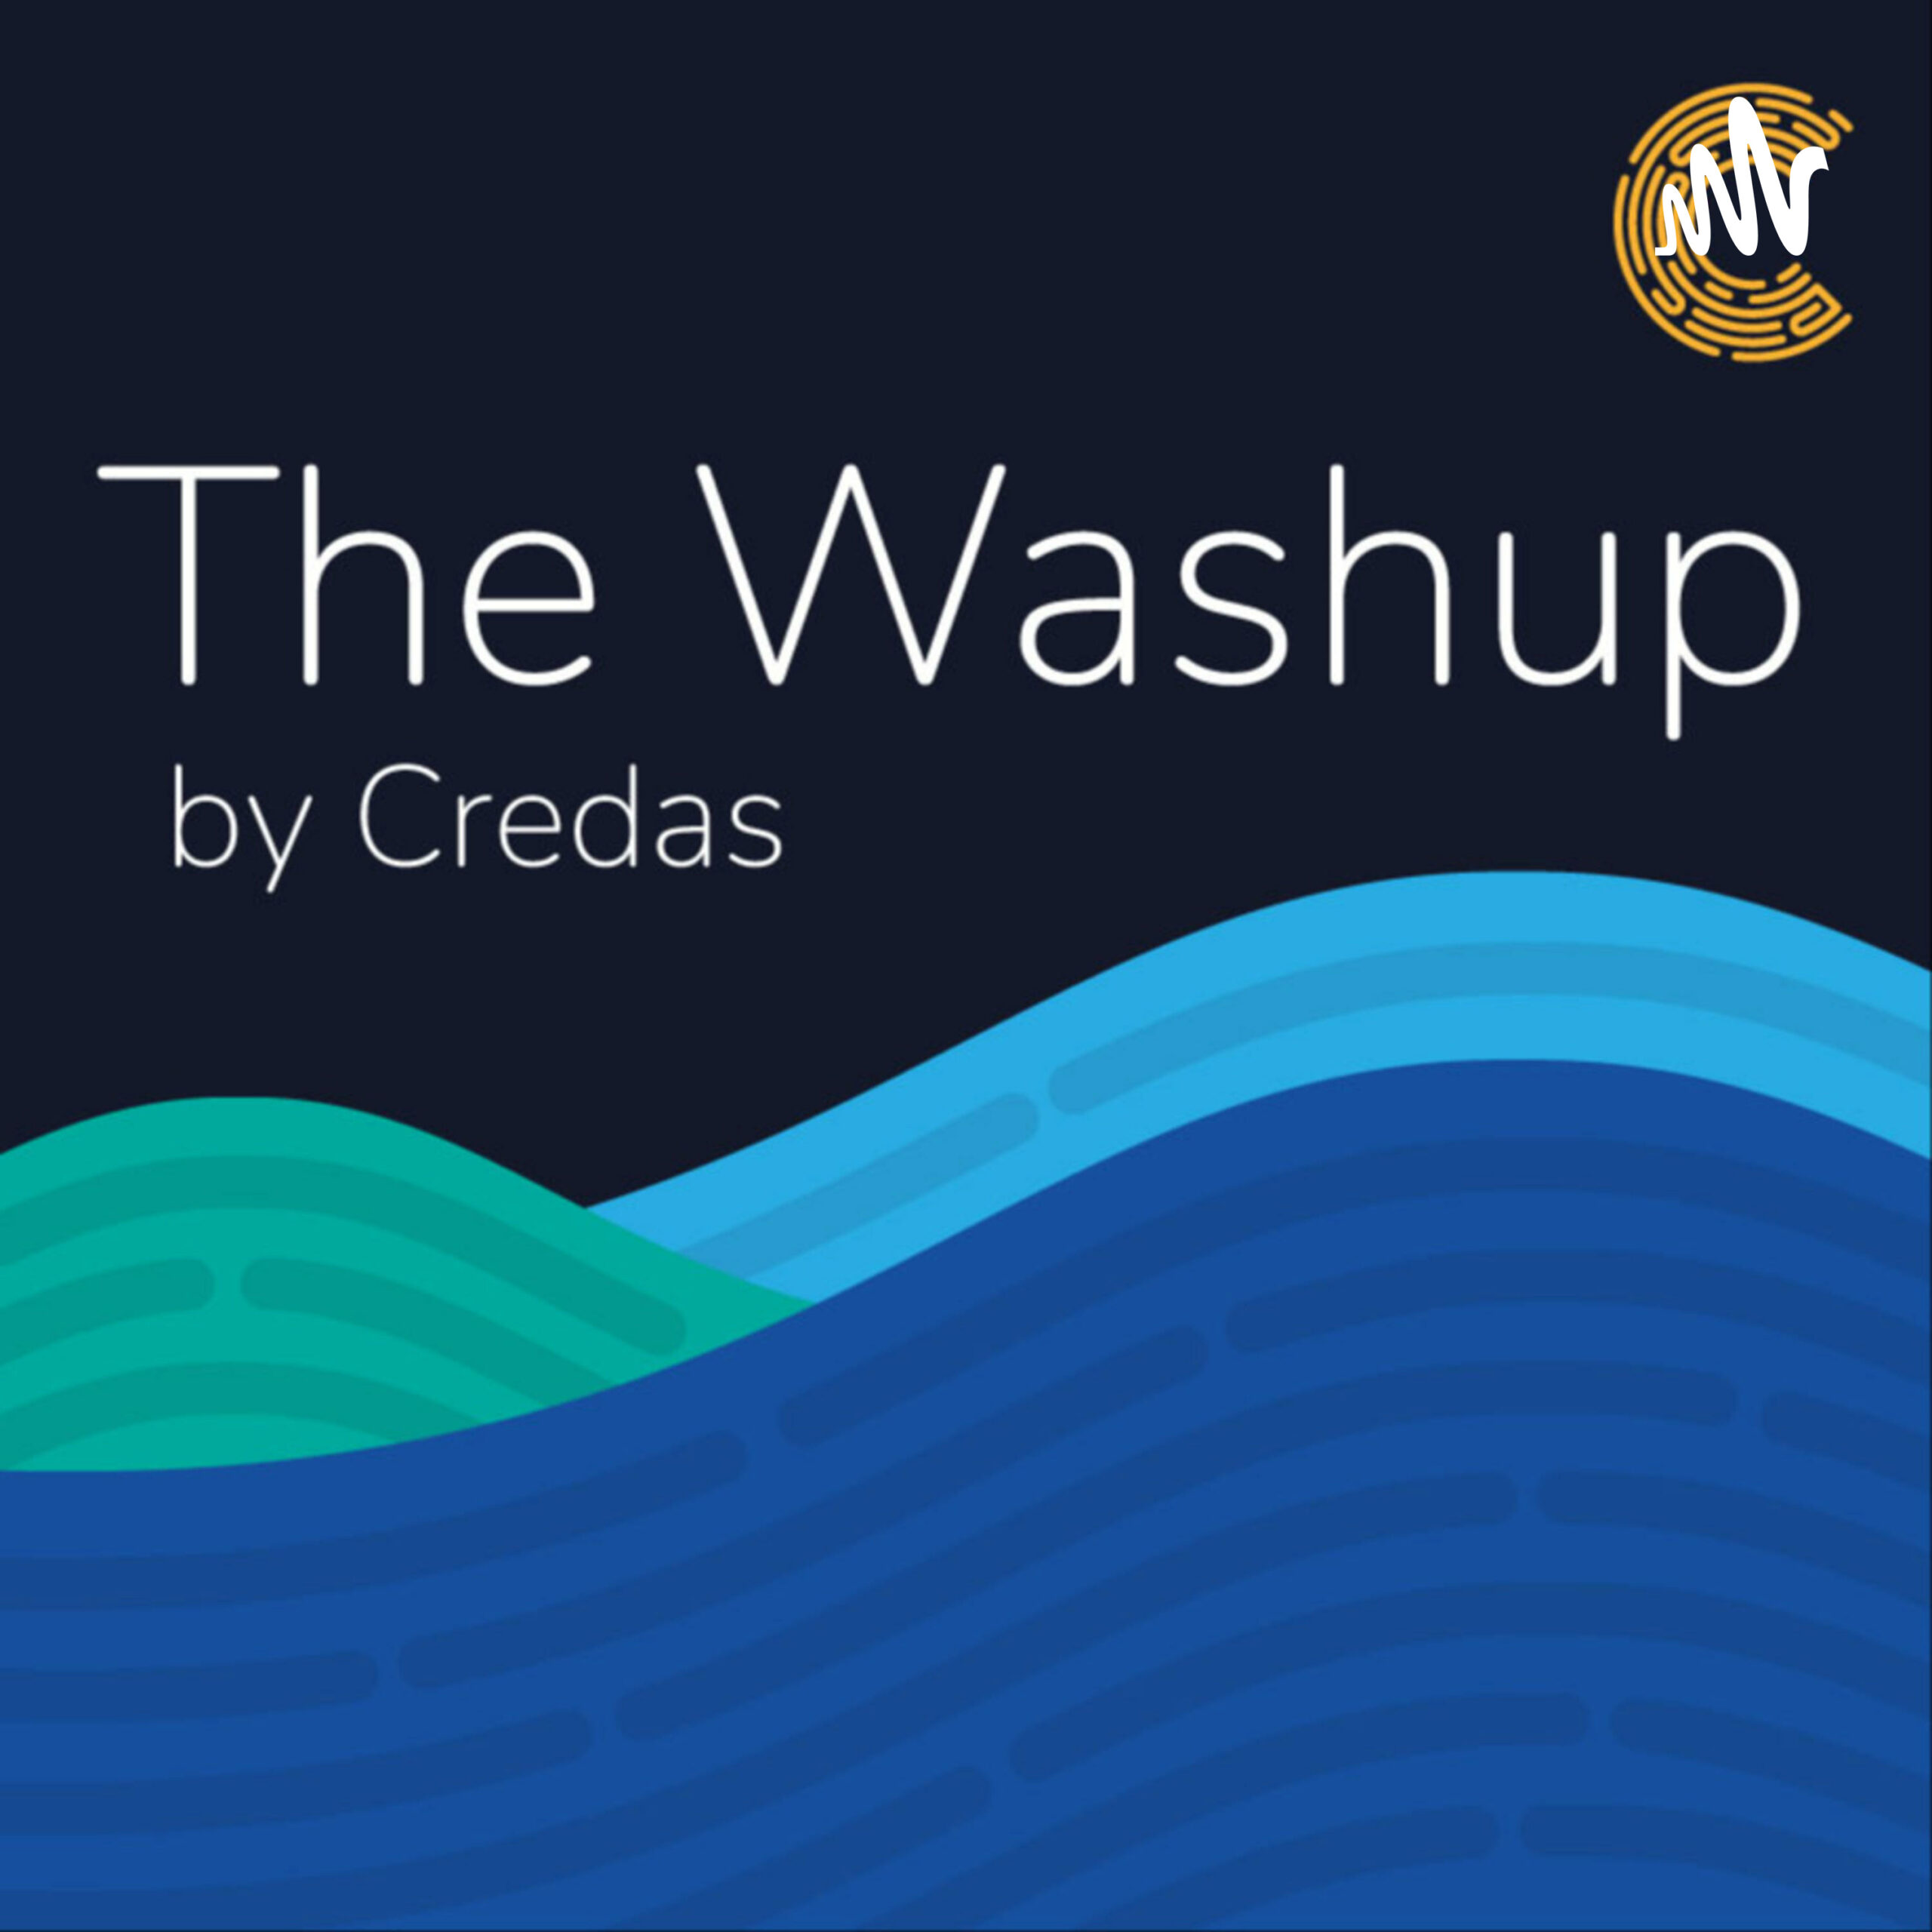 The Washup